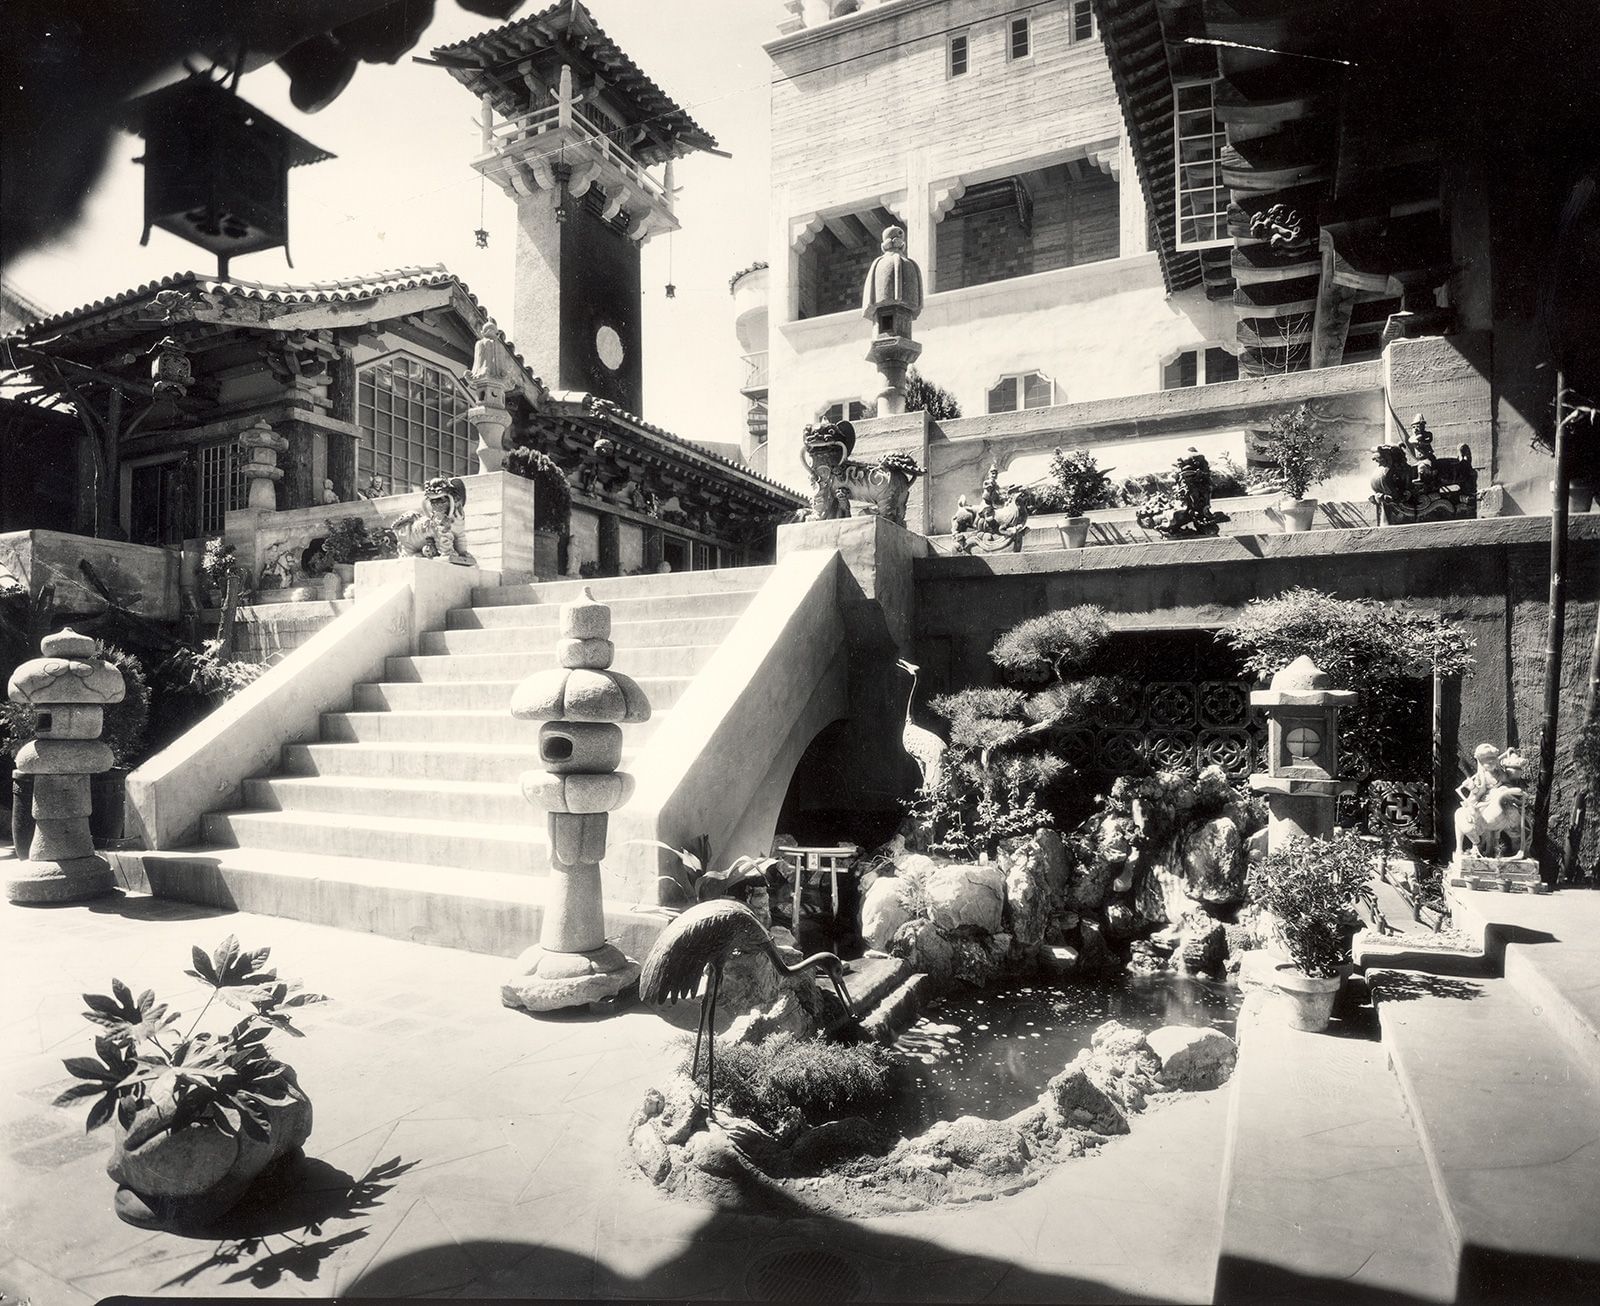 Vintage image of Court of the Orient at Mission Inn Riverside